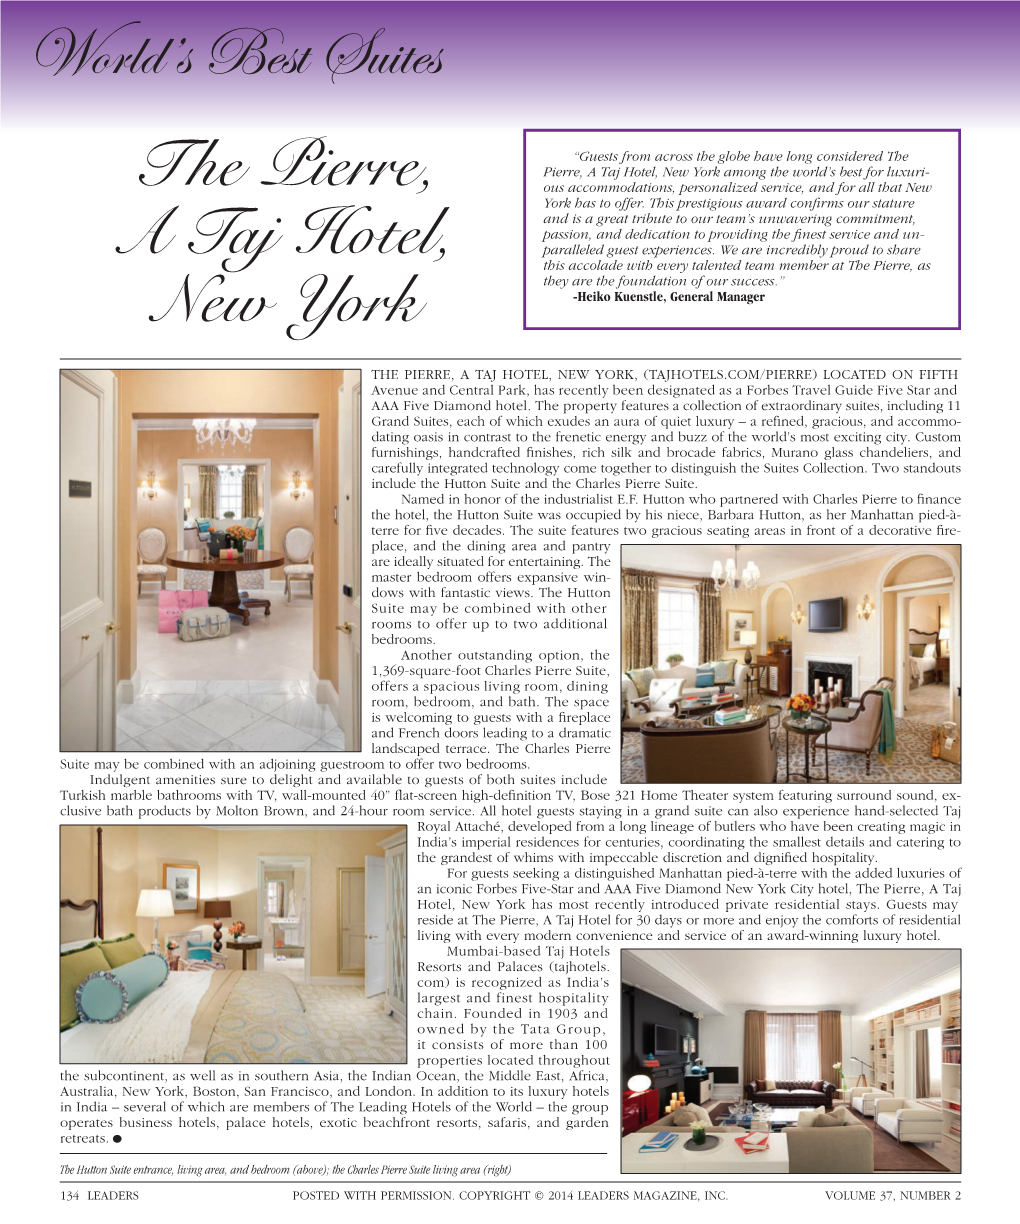 The Pierre, a Taj Hotel, New York Among the World’S Best for Luxuri- the Pierre, Ous Accommodations, Personalized Service, and for All That New York Has to Offer